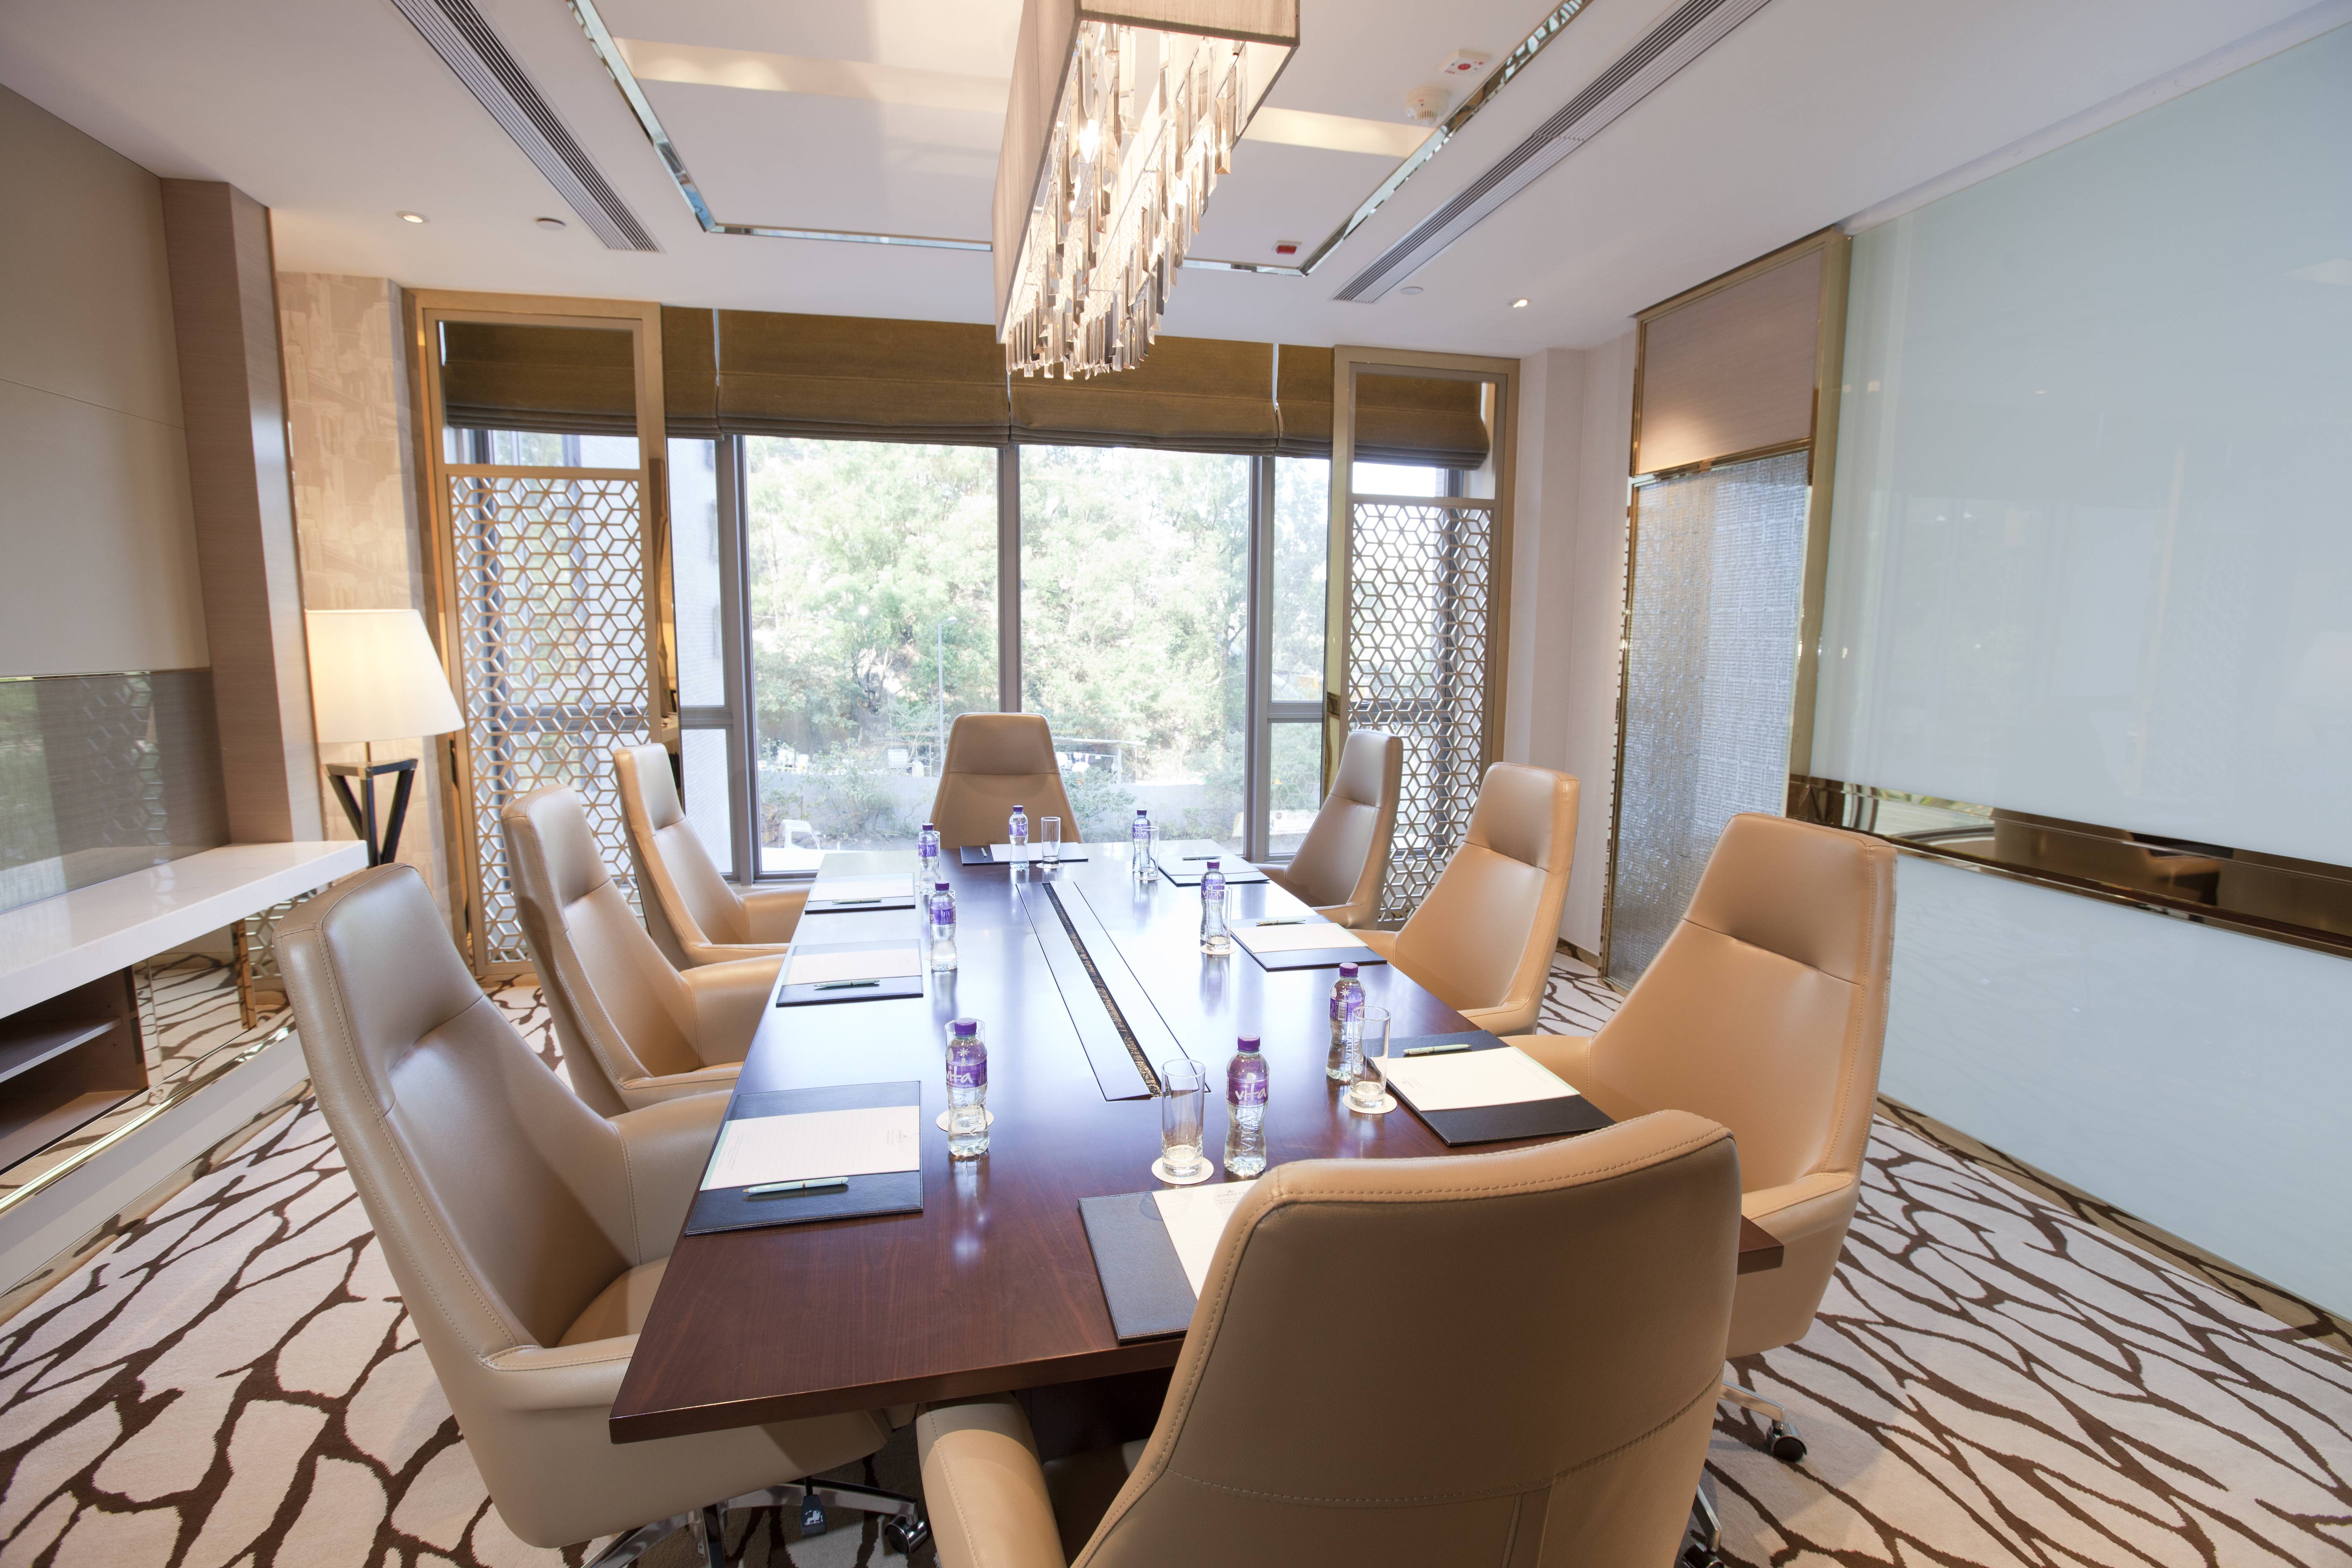 Banquet Room Flexible meeting rooms with a private restroom and breakout room